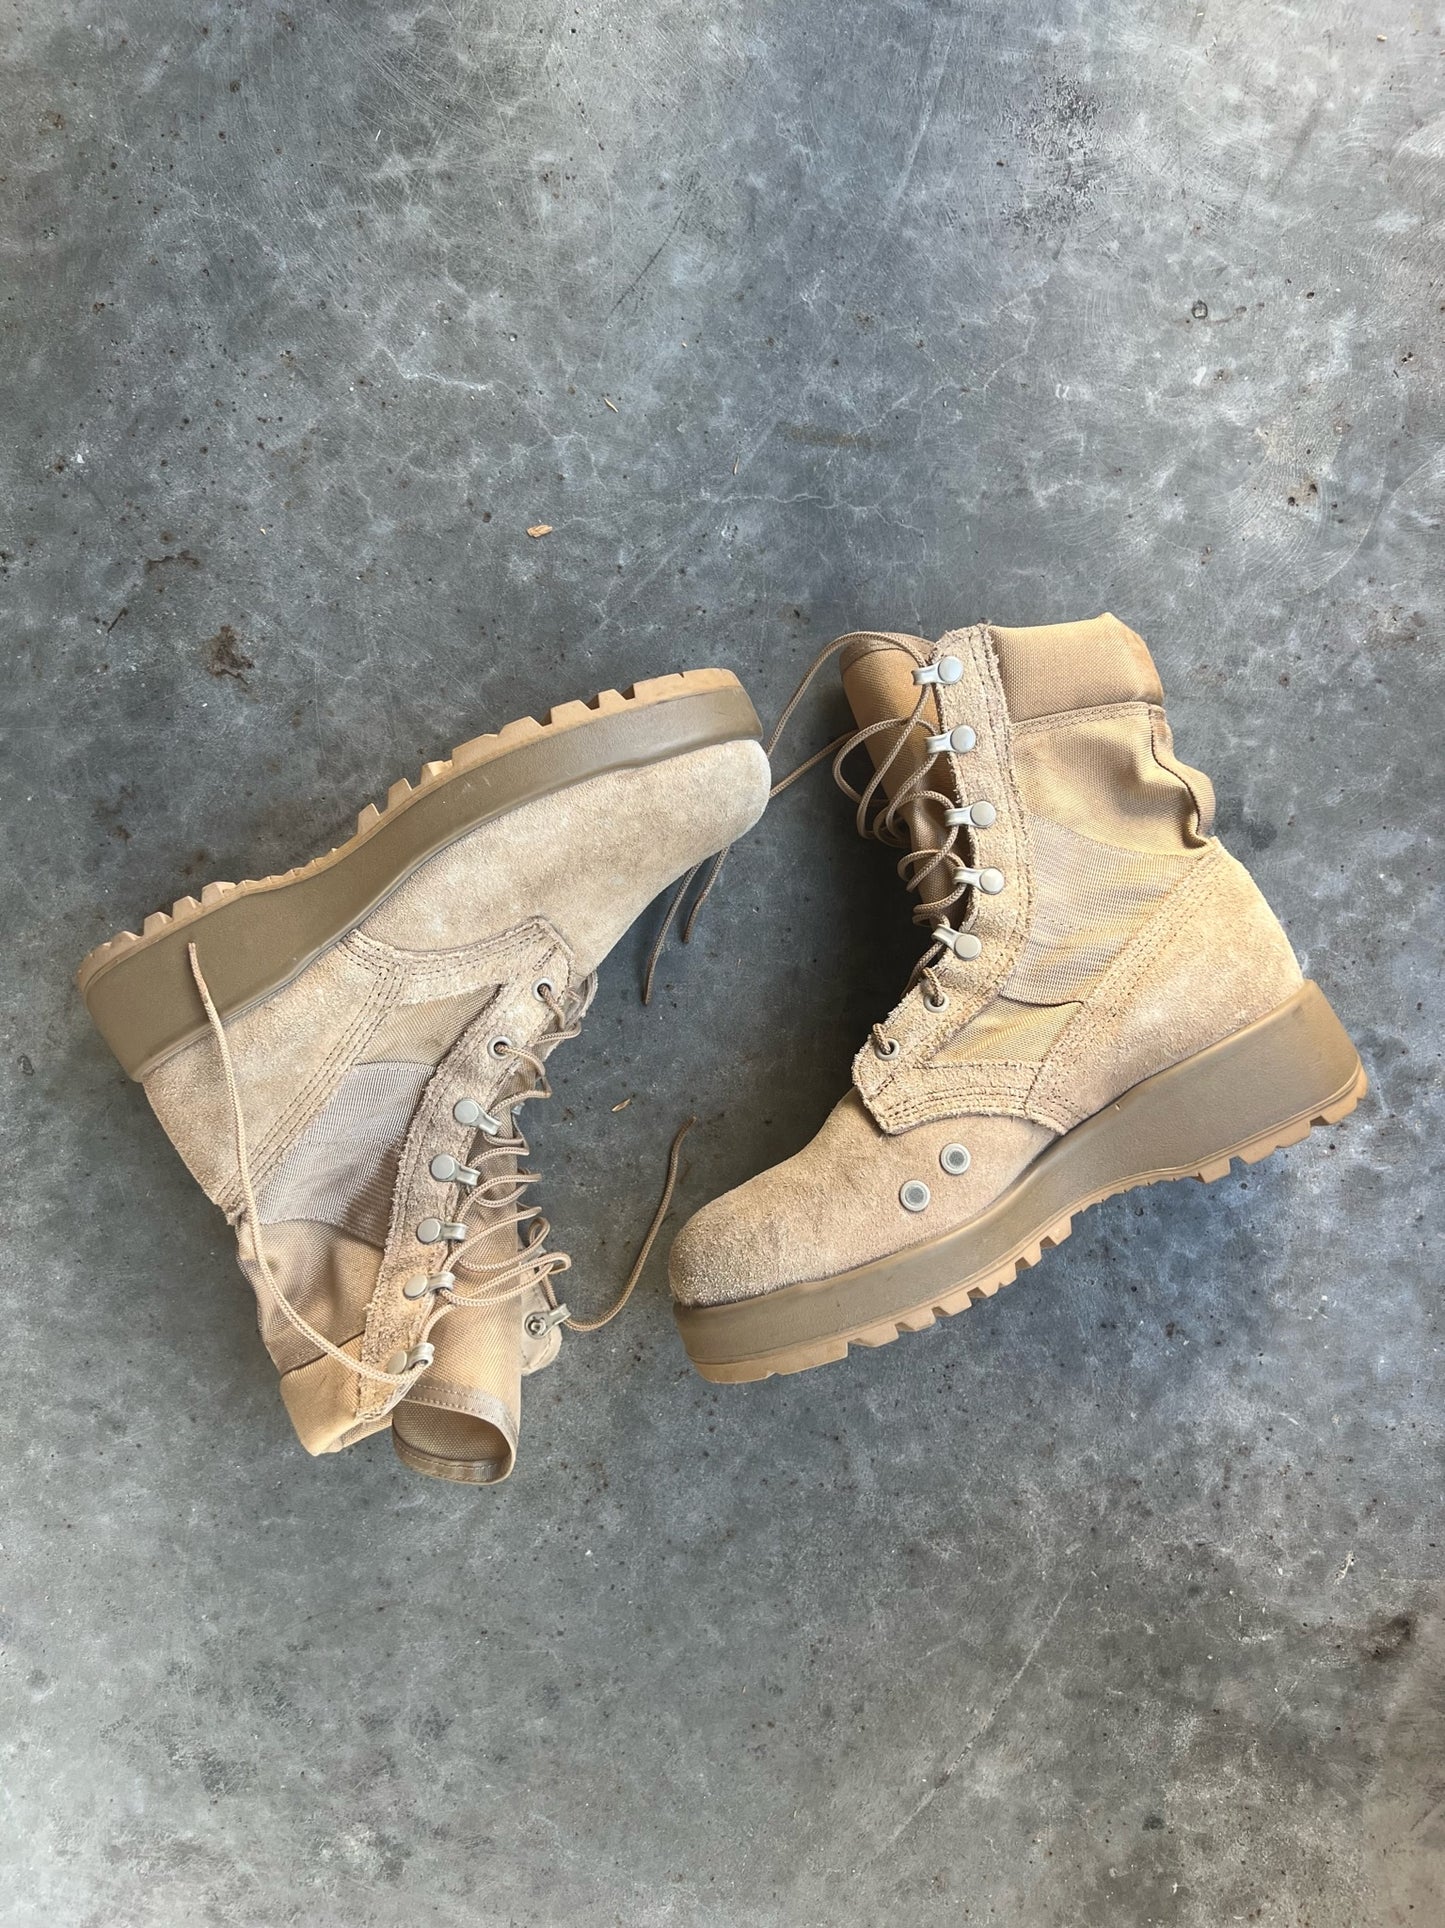 Vintage Military Boots - 7.5